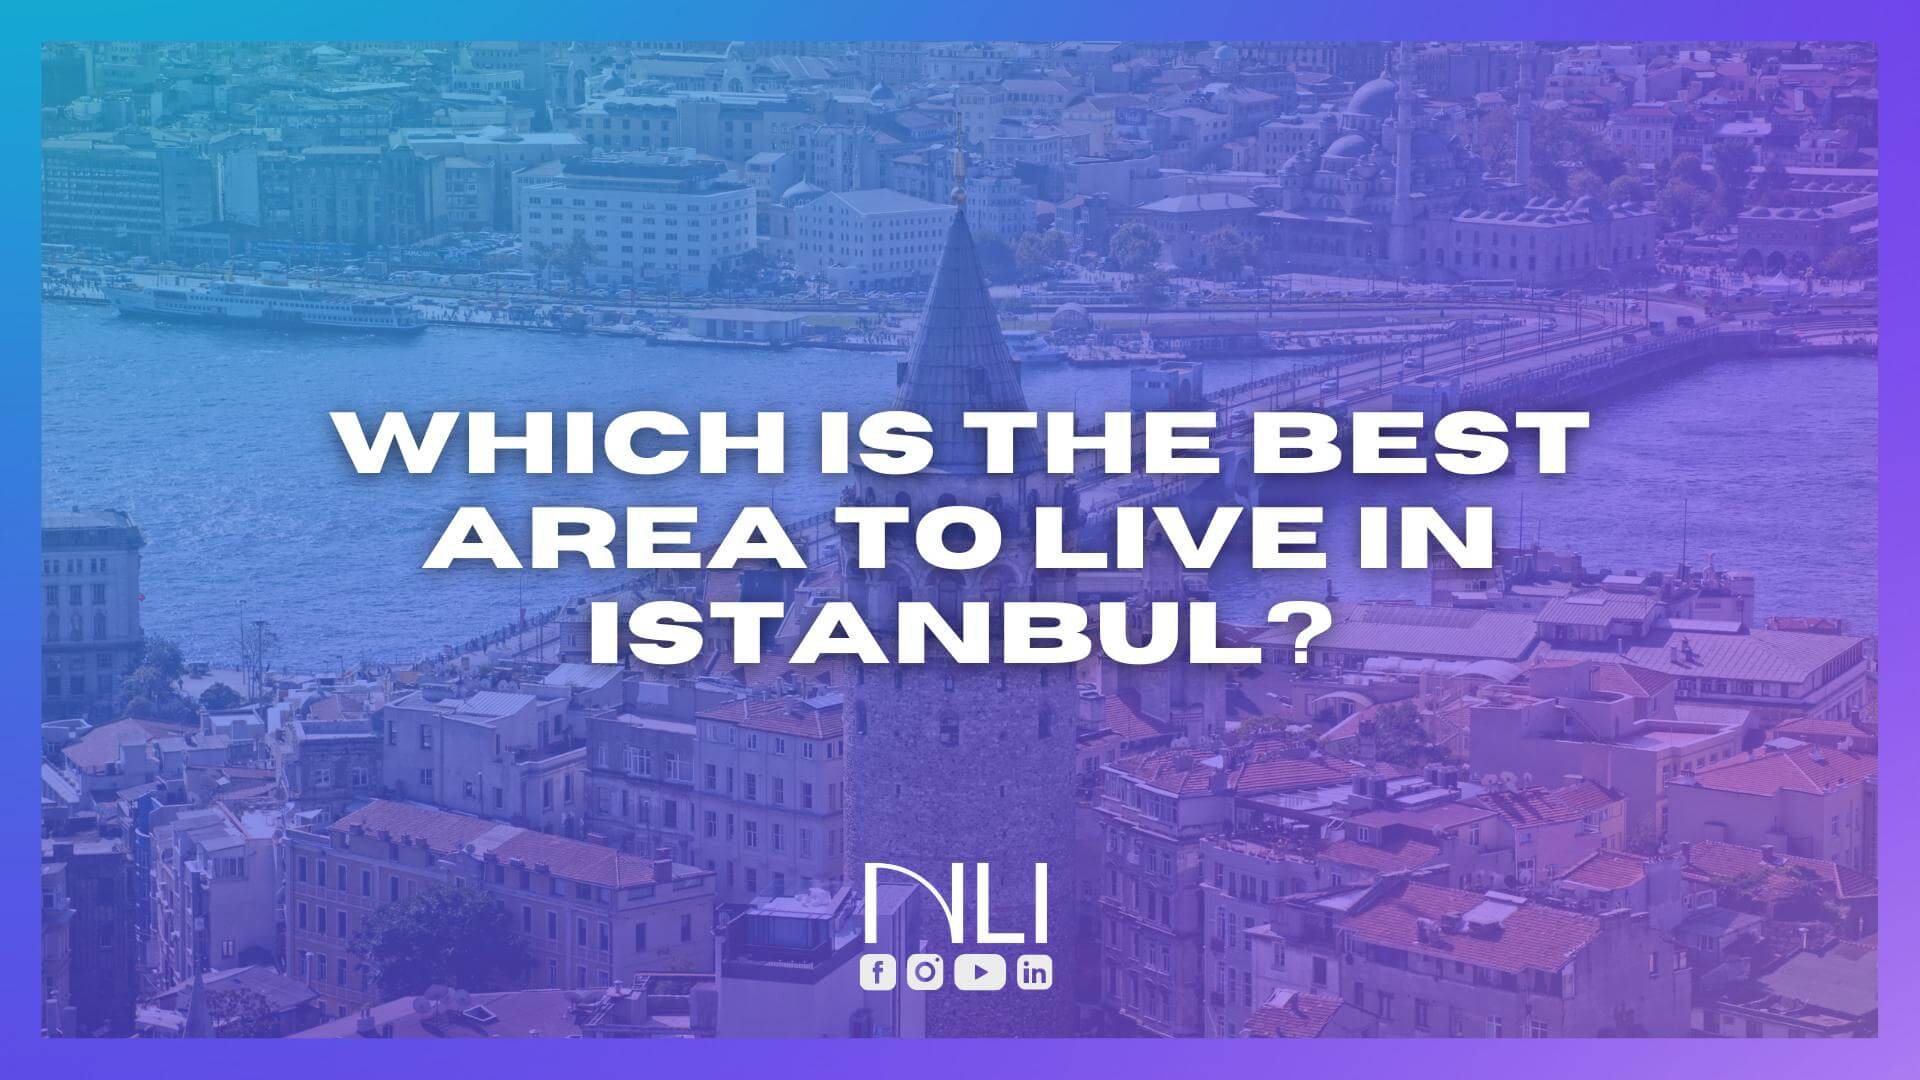 Which is the best area to live in Istanbul